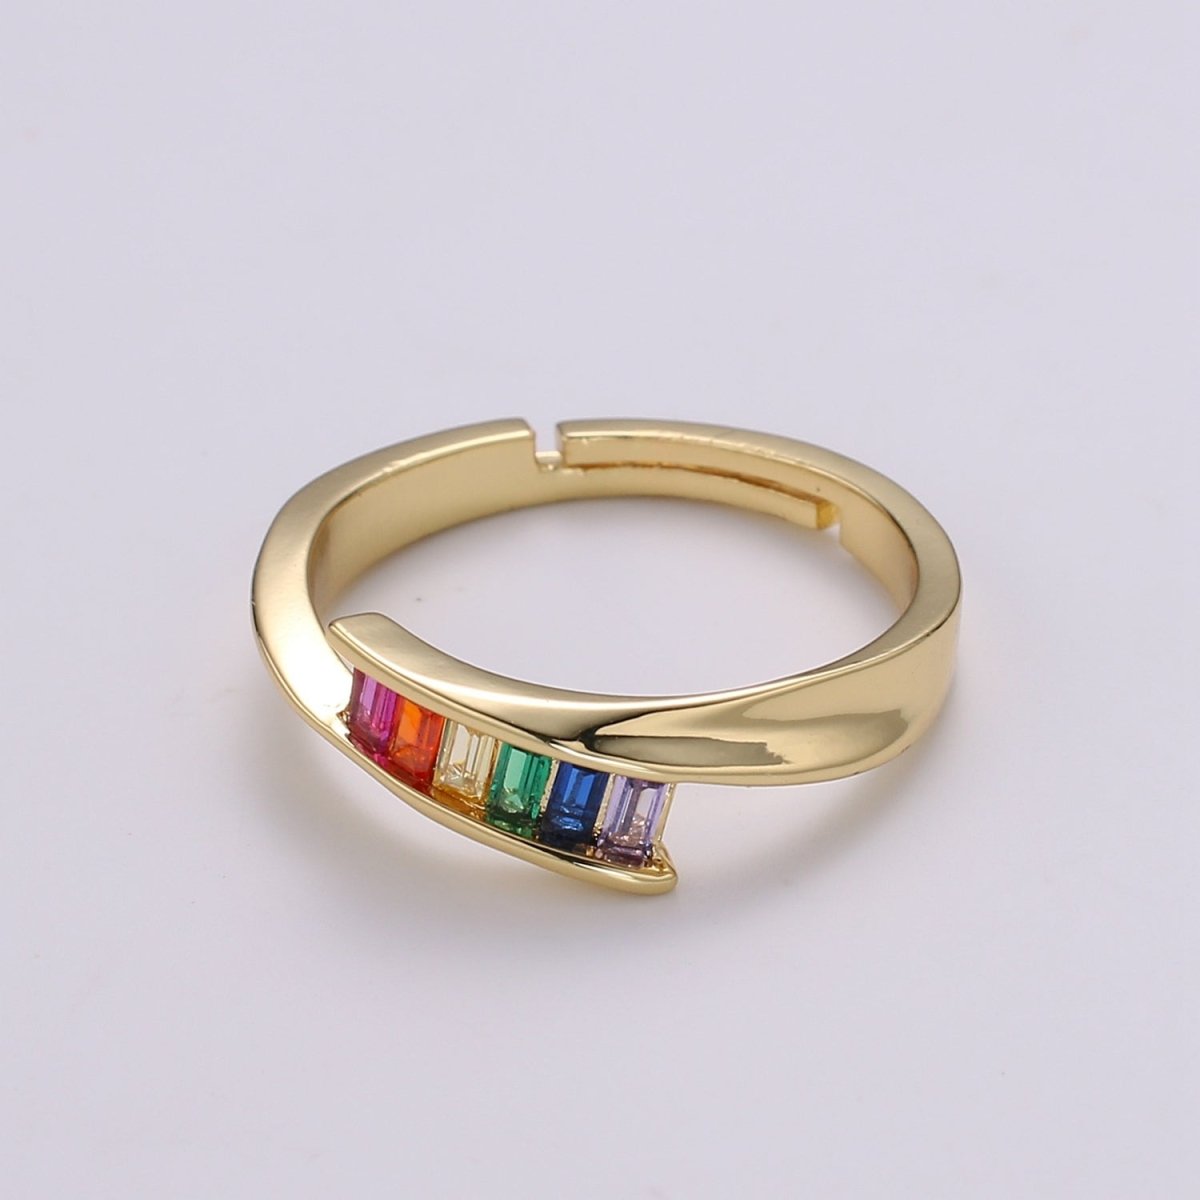 Dainty Rainbow Baguette Ring - Colorful Ring - Multicolor Stone Ring - Rainbow Jewelry - Stacking Ring Adjustable Ring US Size 7.5 R502 - DLUXCA